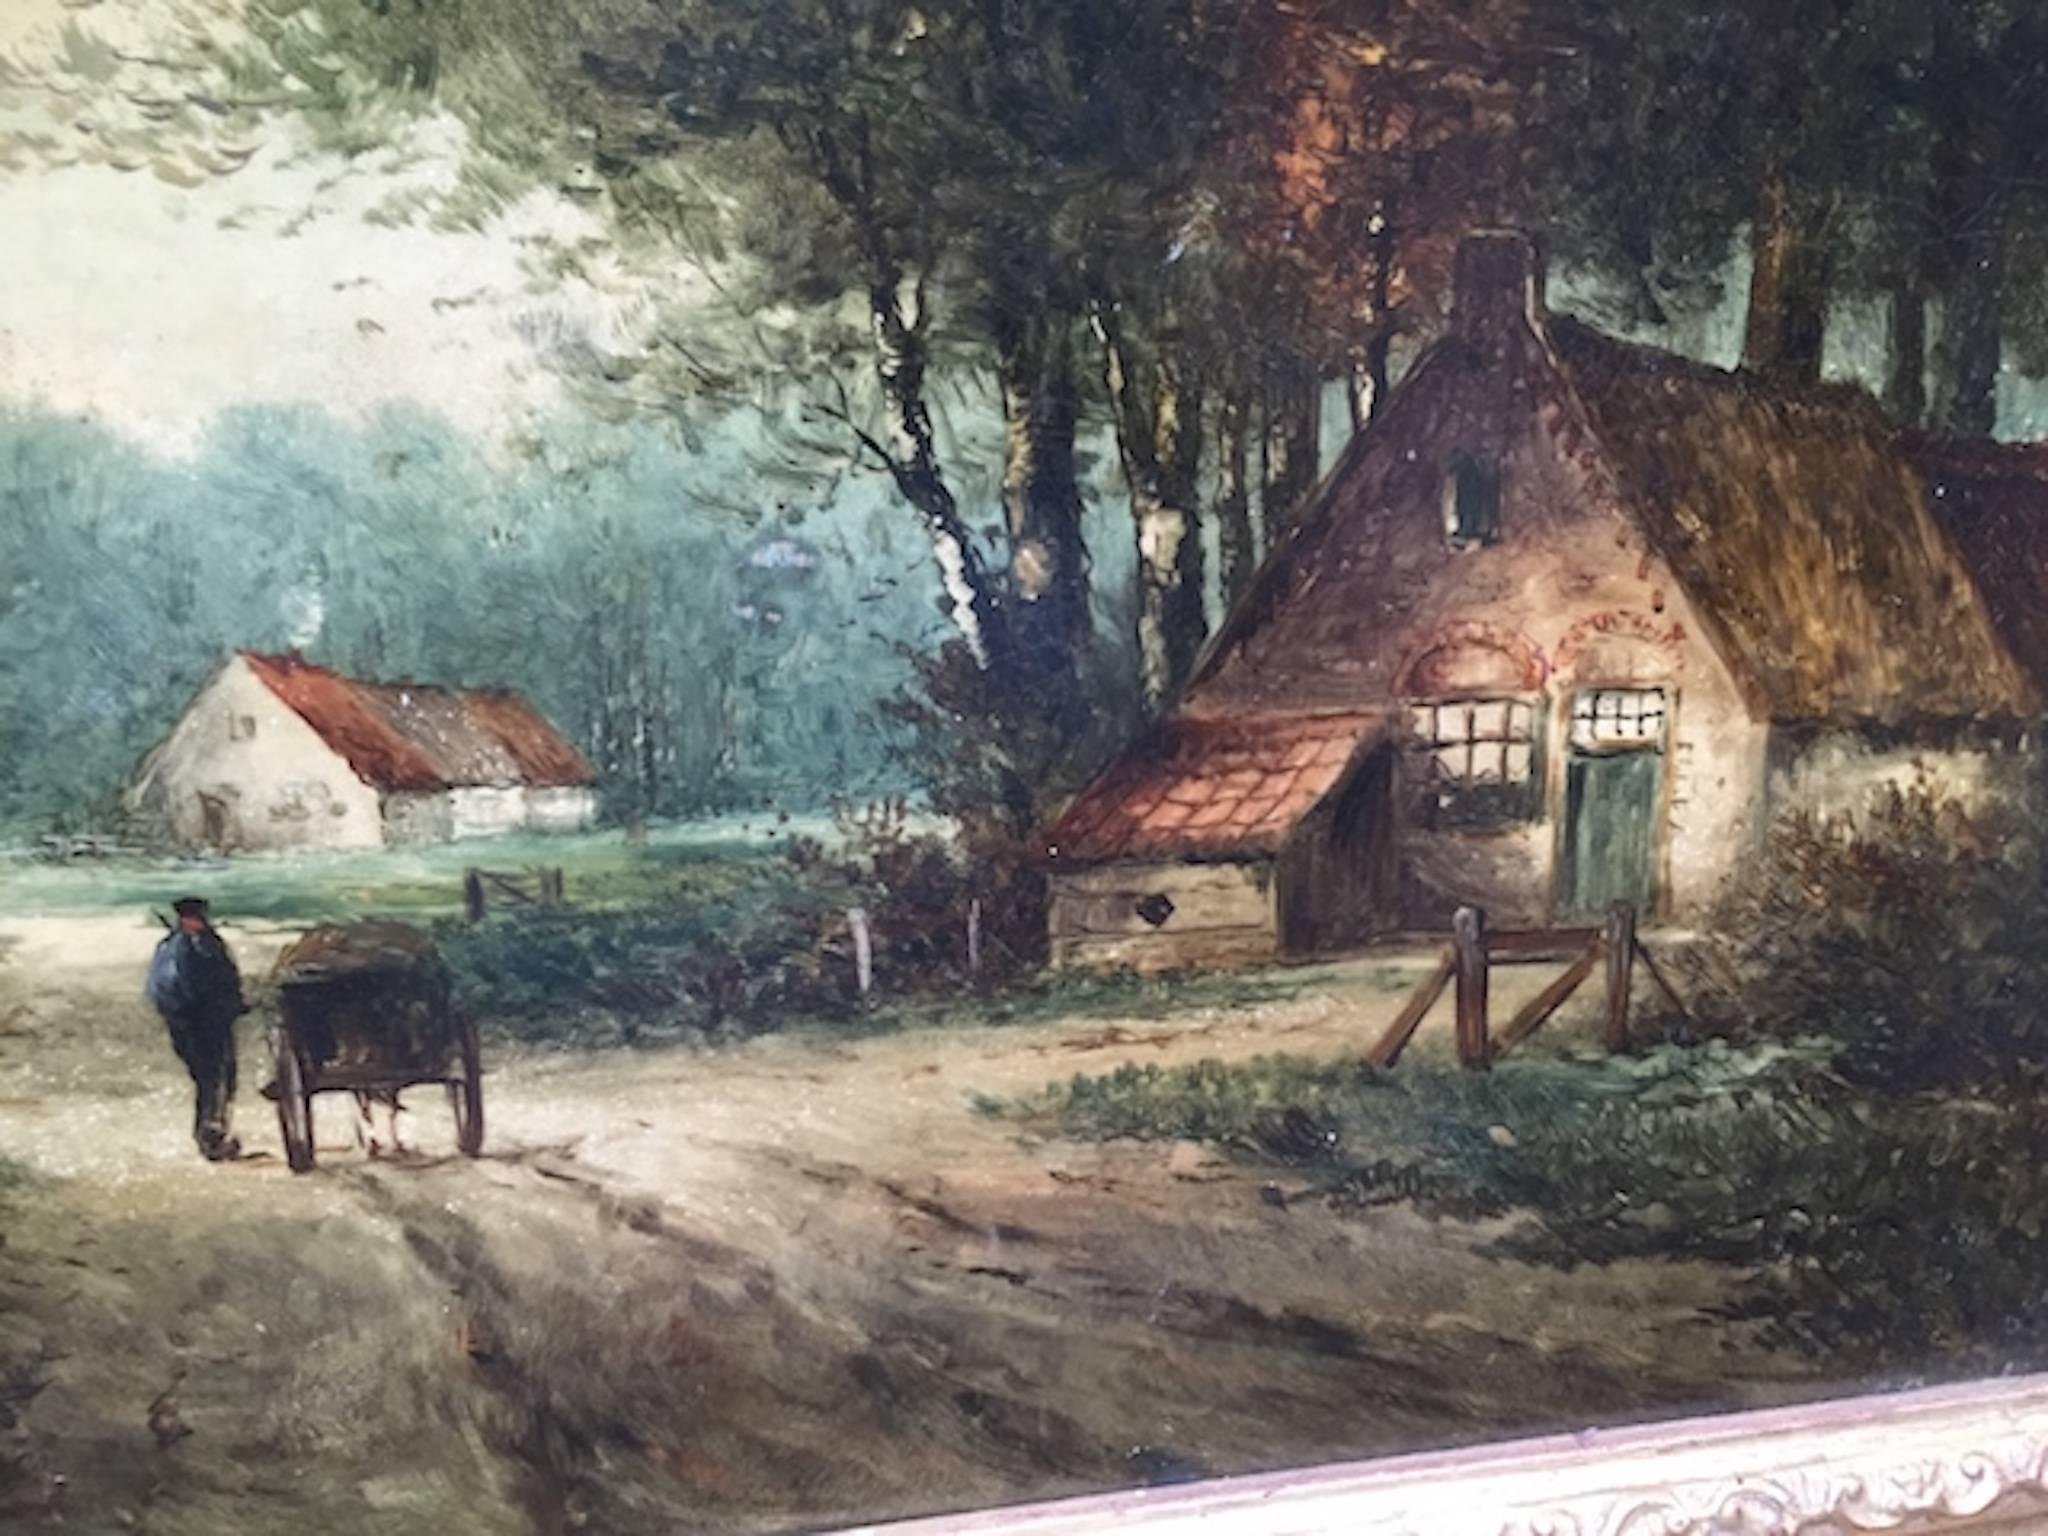 N. Gihaux (French, 19th century) Country Road and Cottage Landscape. Hand-painted porcelain. Signed 

"N. Gihaux" l.l. Measures: Sight 15 x 23 inches. Framed 23 x 31 inches.